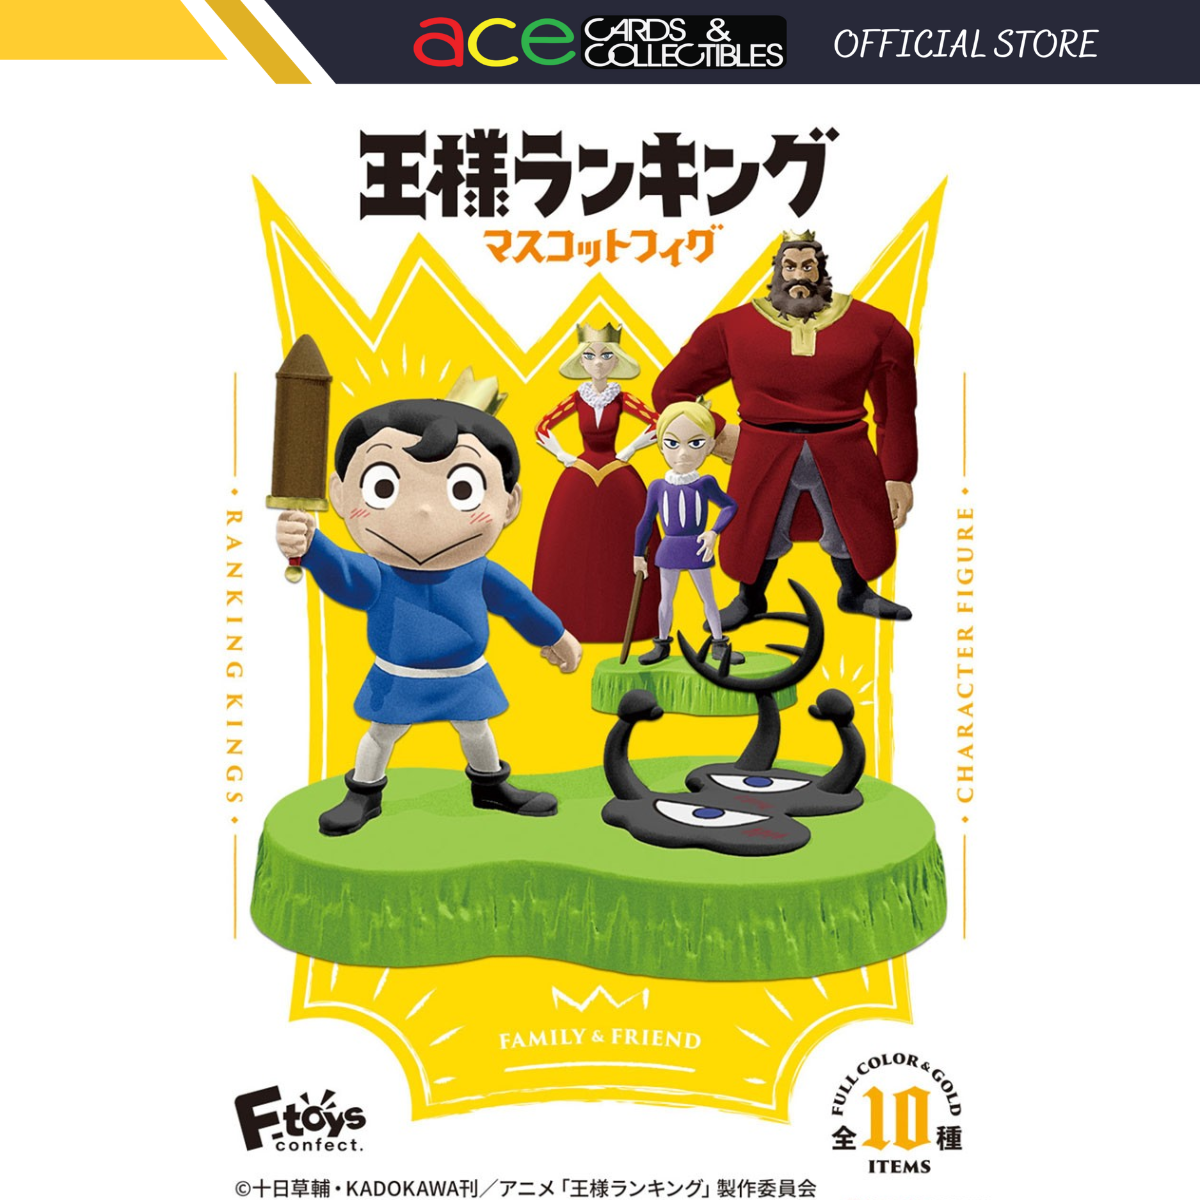 Ranking Of Kings Character Figure-Single Box (Random)-F-toys confect-Ace Cards & Collectibles